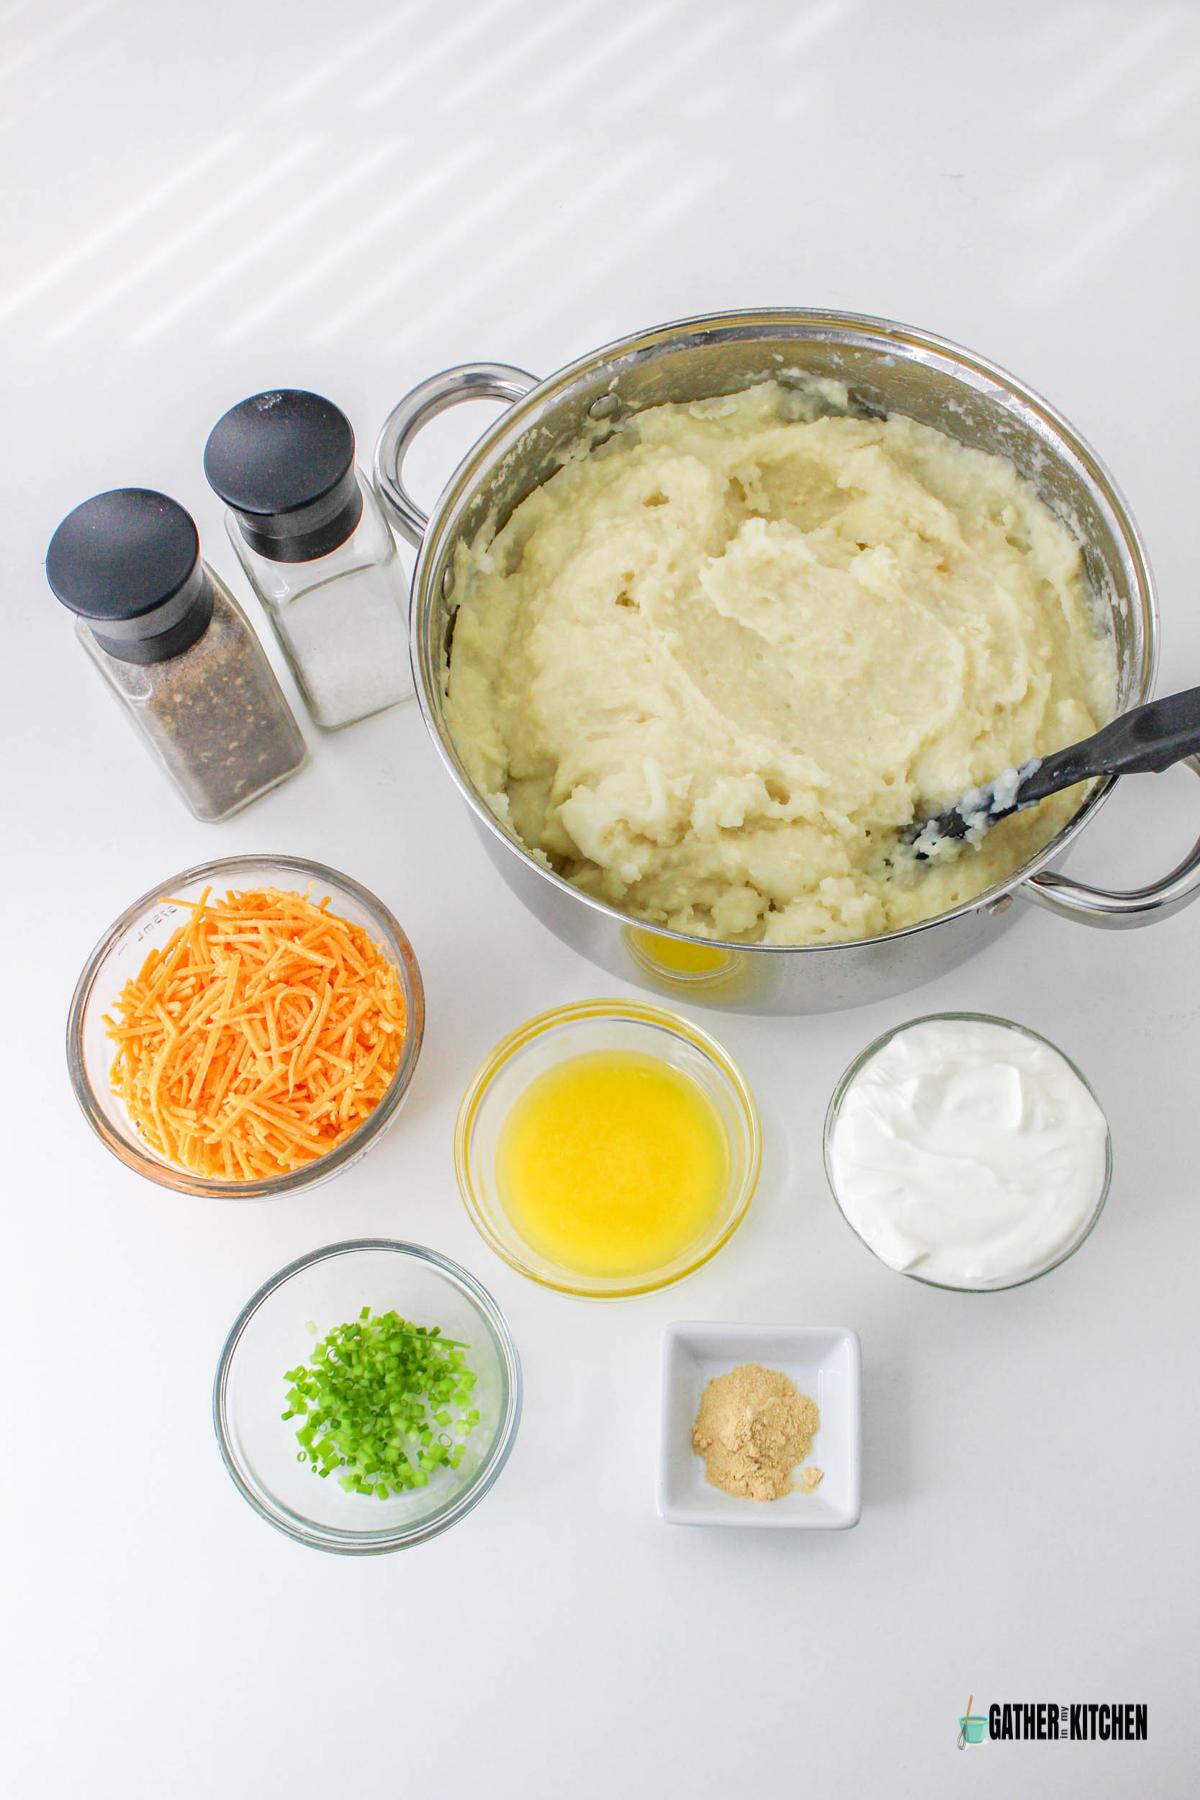 Ingredients: mashed potatoes, sour cream, garlic powder, melted butter, chives, shredded cheese, salt and pepper. 